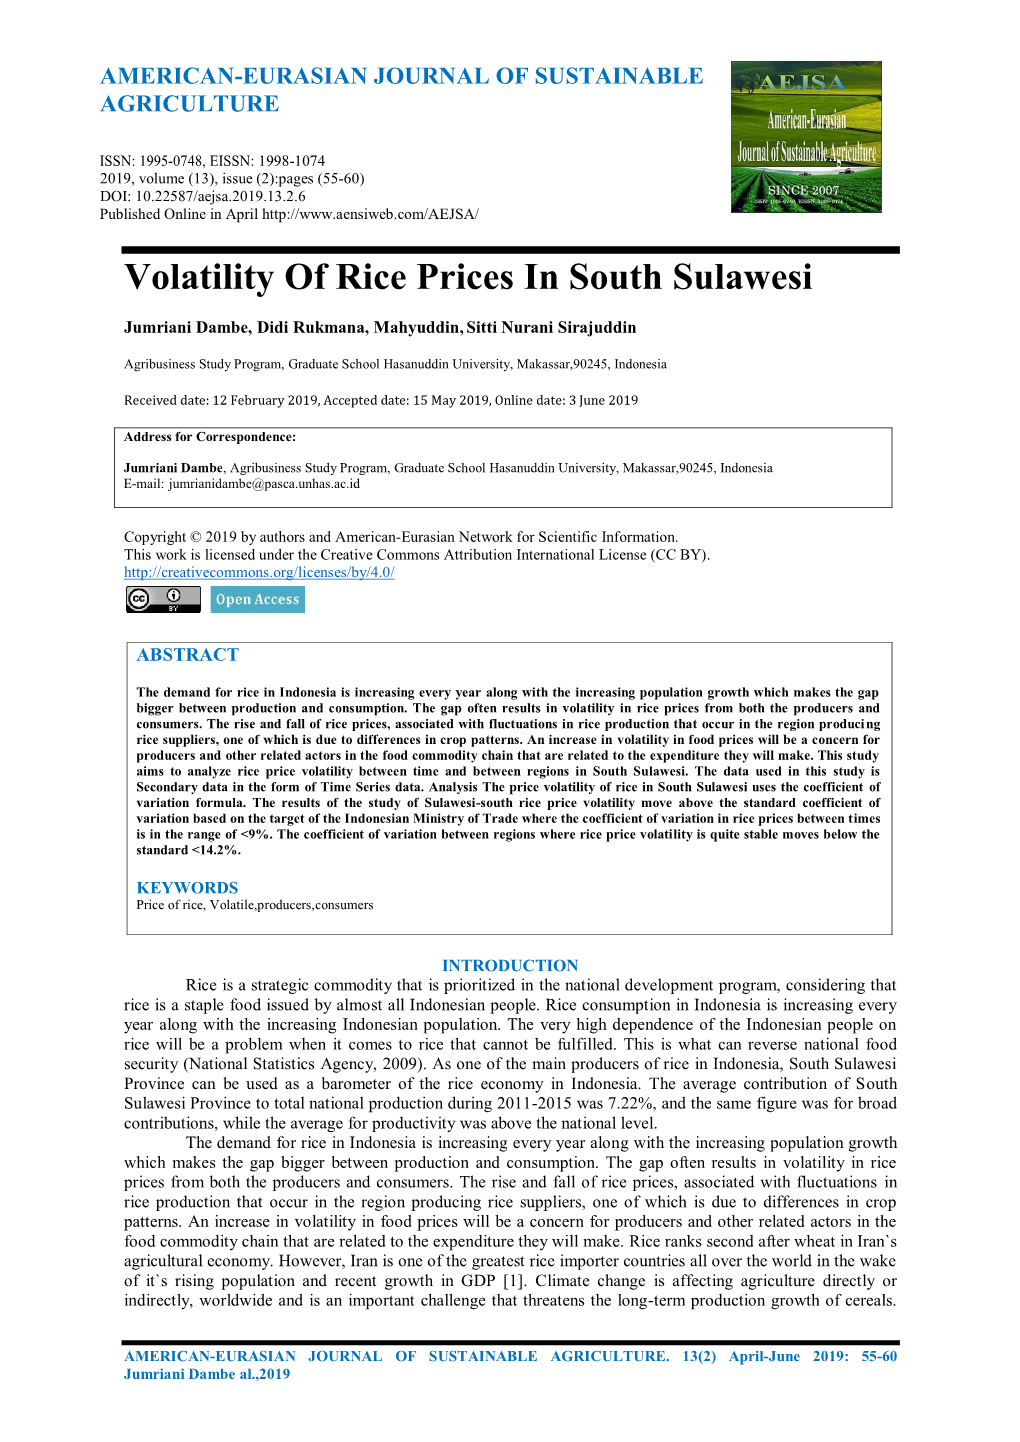 Volatility of Rice Prices in South Sulawesi